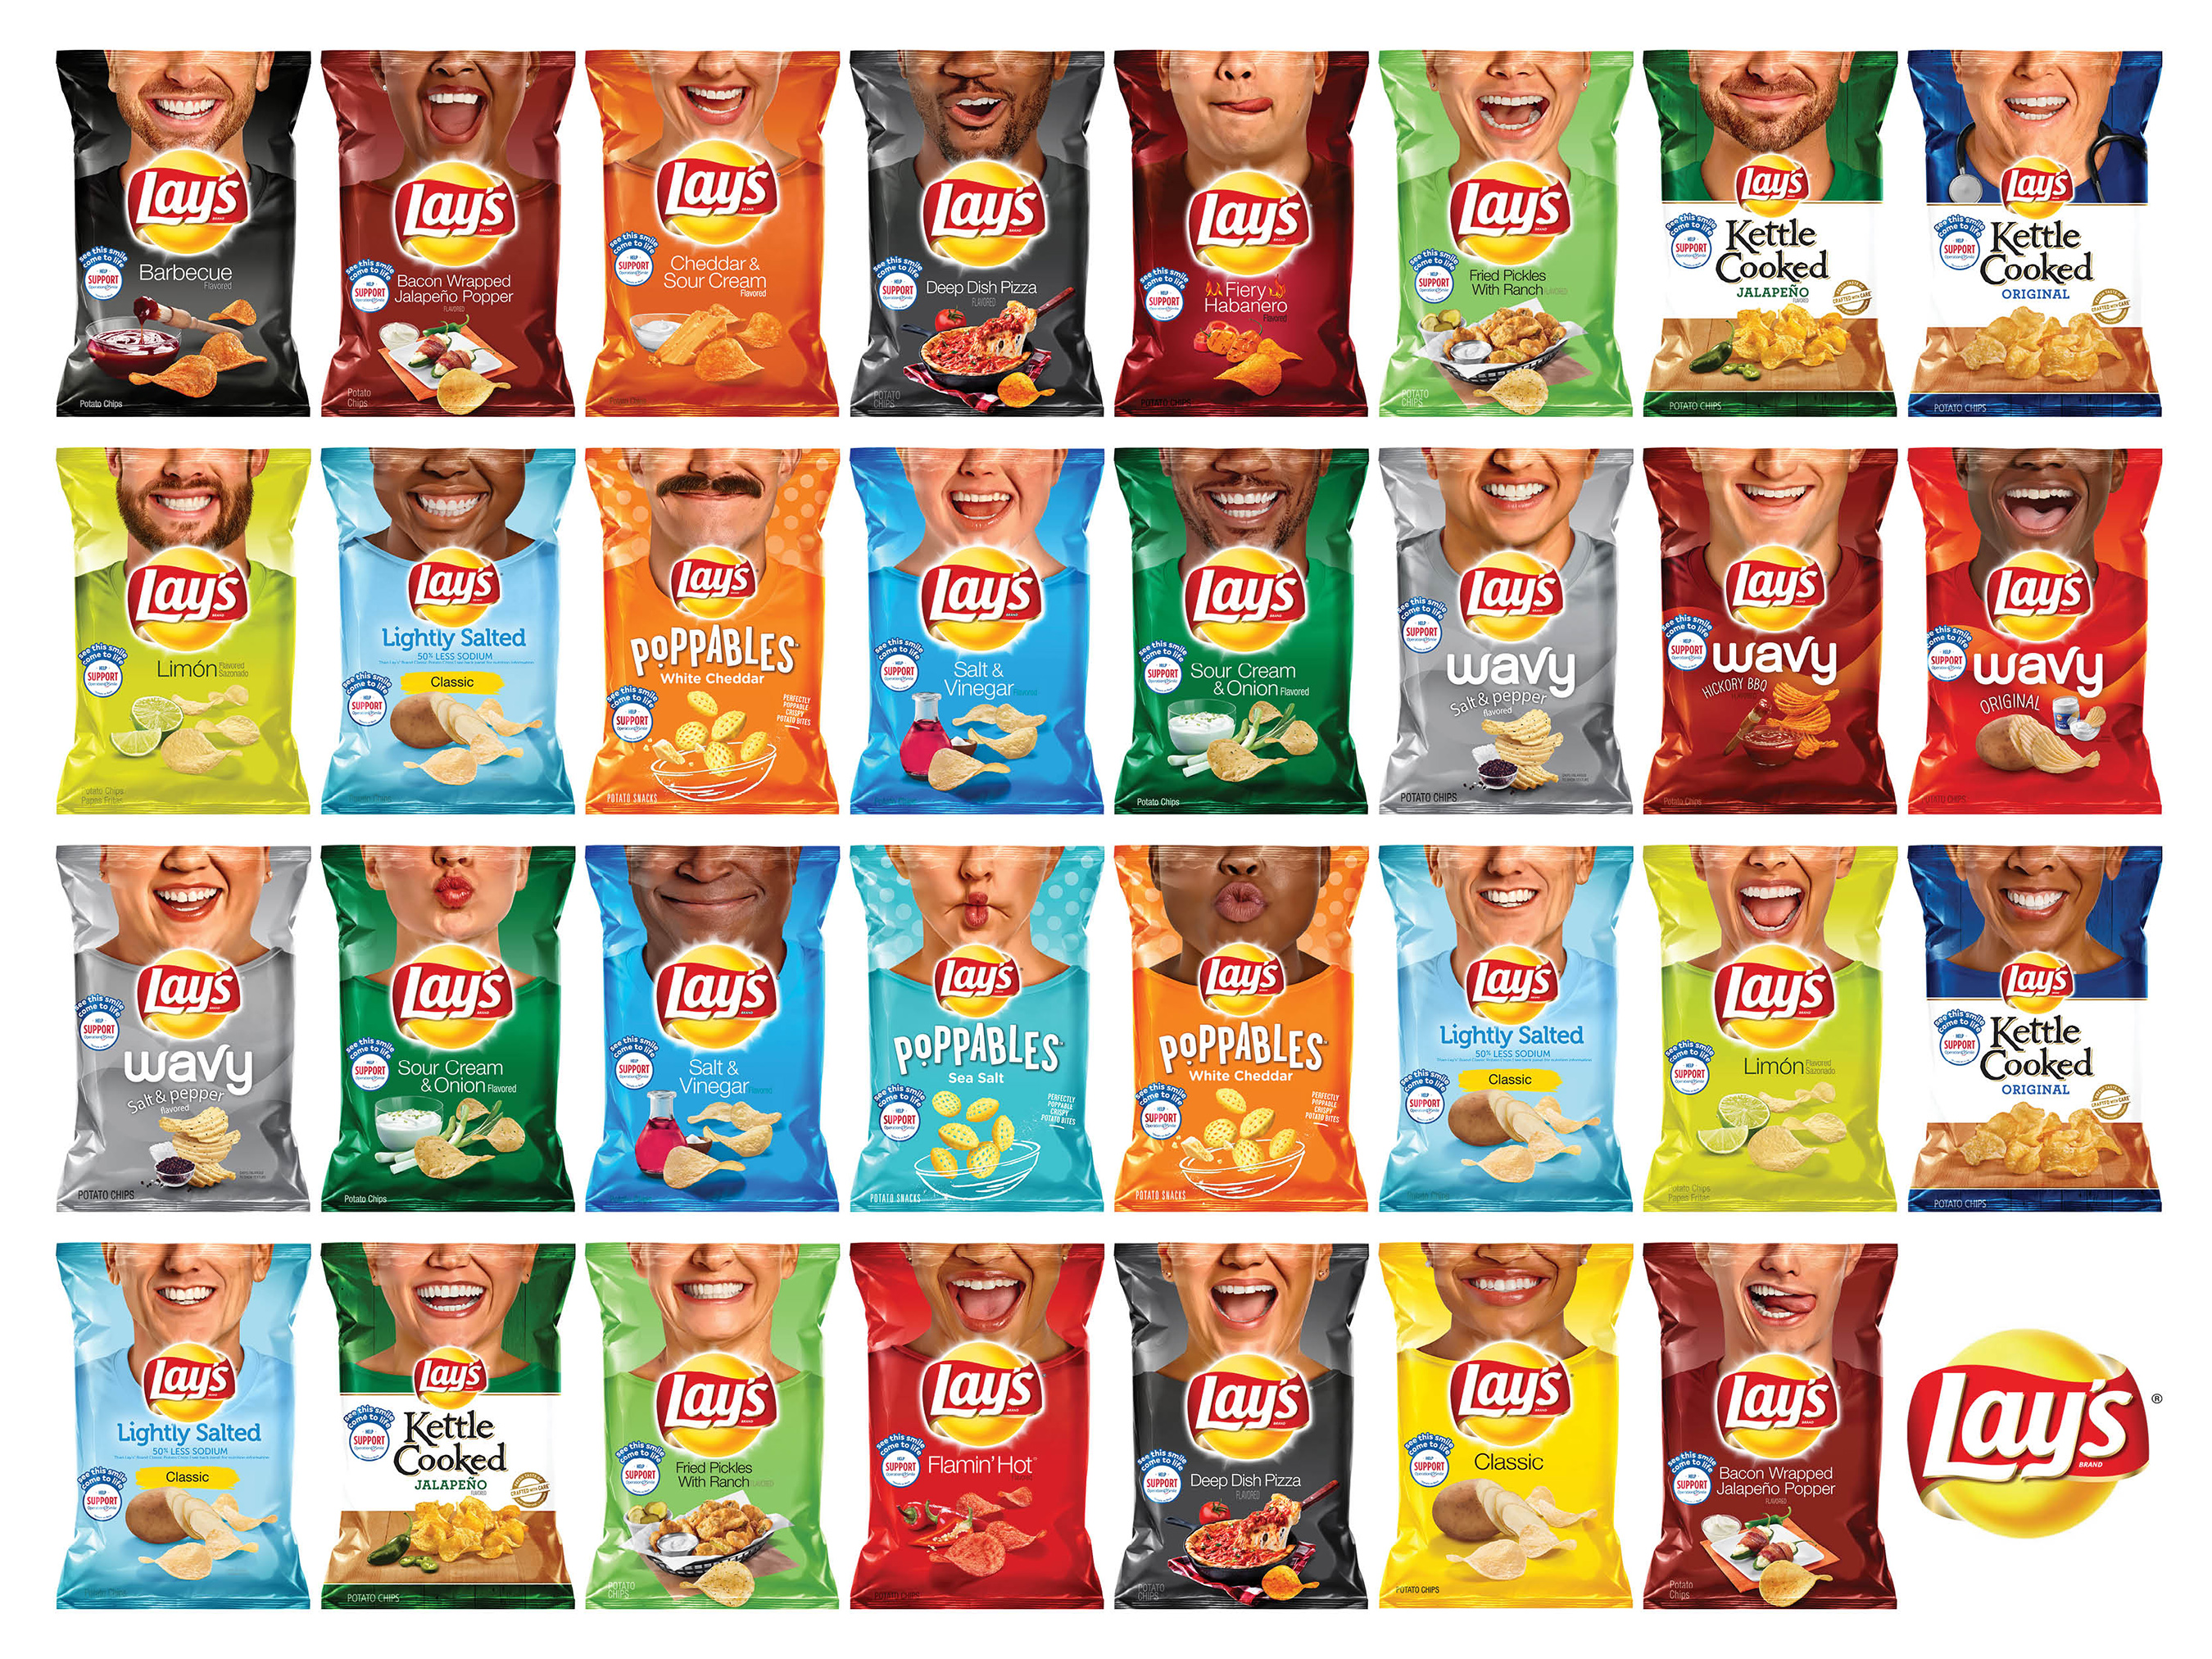 Lay’s Unveils 60+ New Potato Chip Bags Starring 31 ‘Everyday Smilers’ in Campaign to Donate $1 Million to Operation Smile